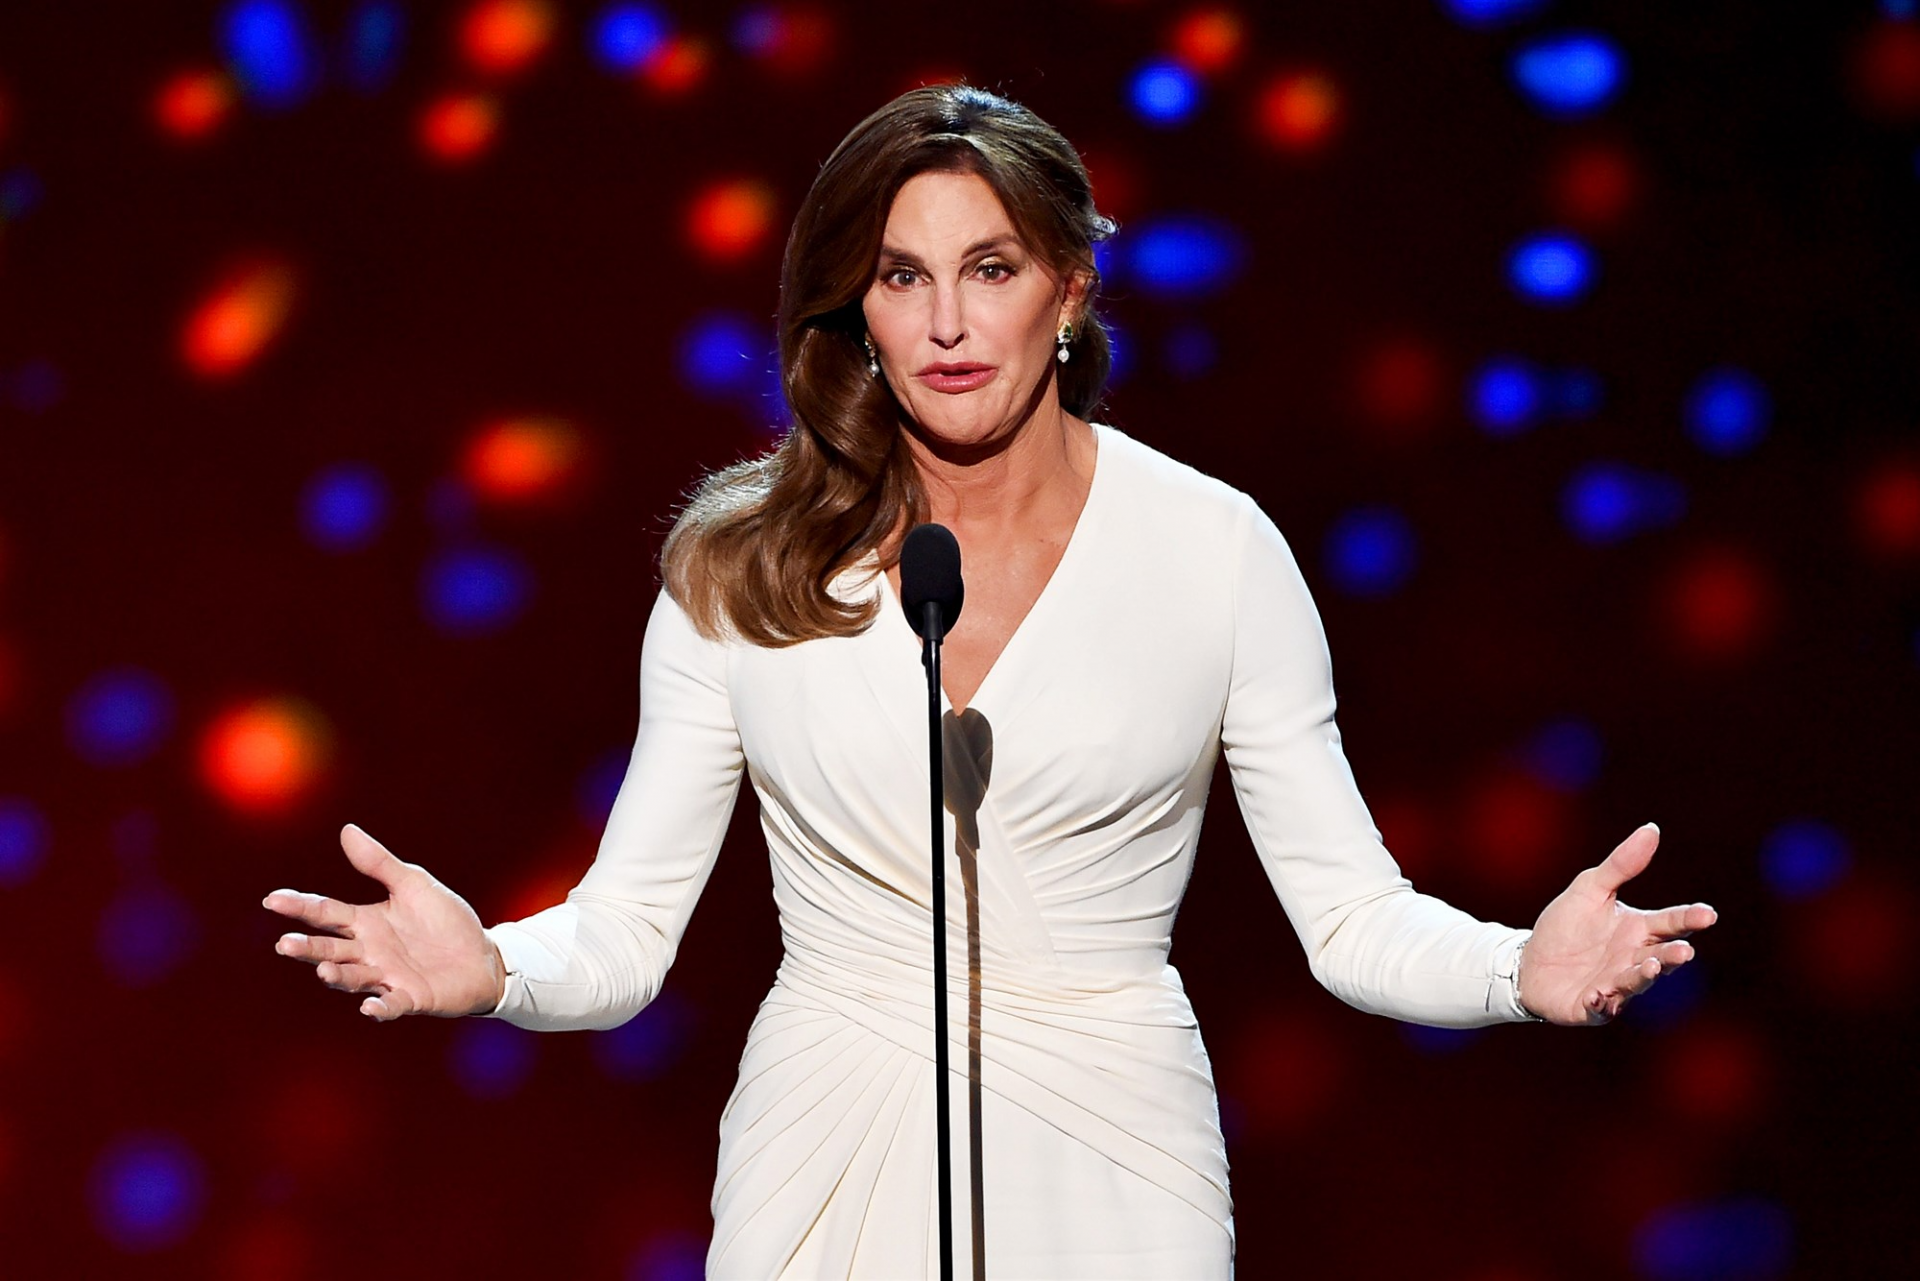 Caitlyn Jenner running for Cali Governor: Who is She, Announcement, and Intention